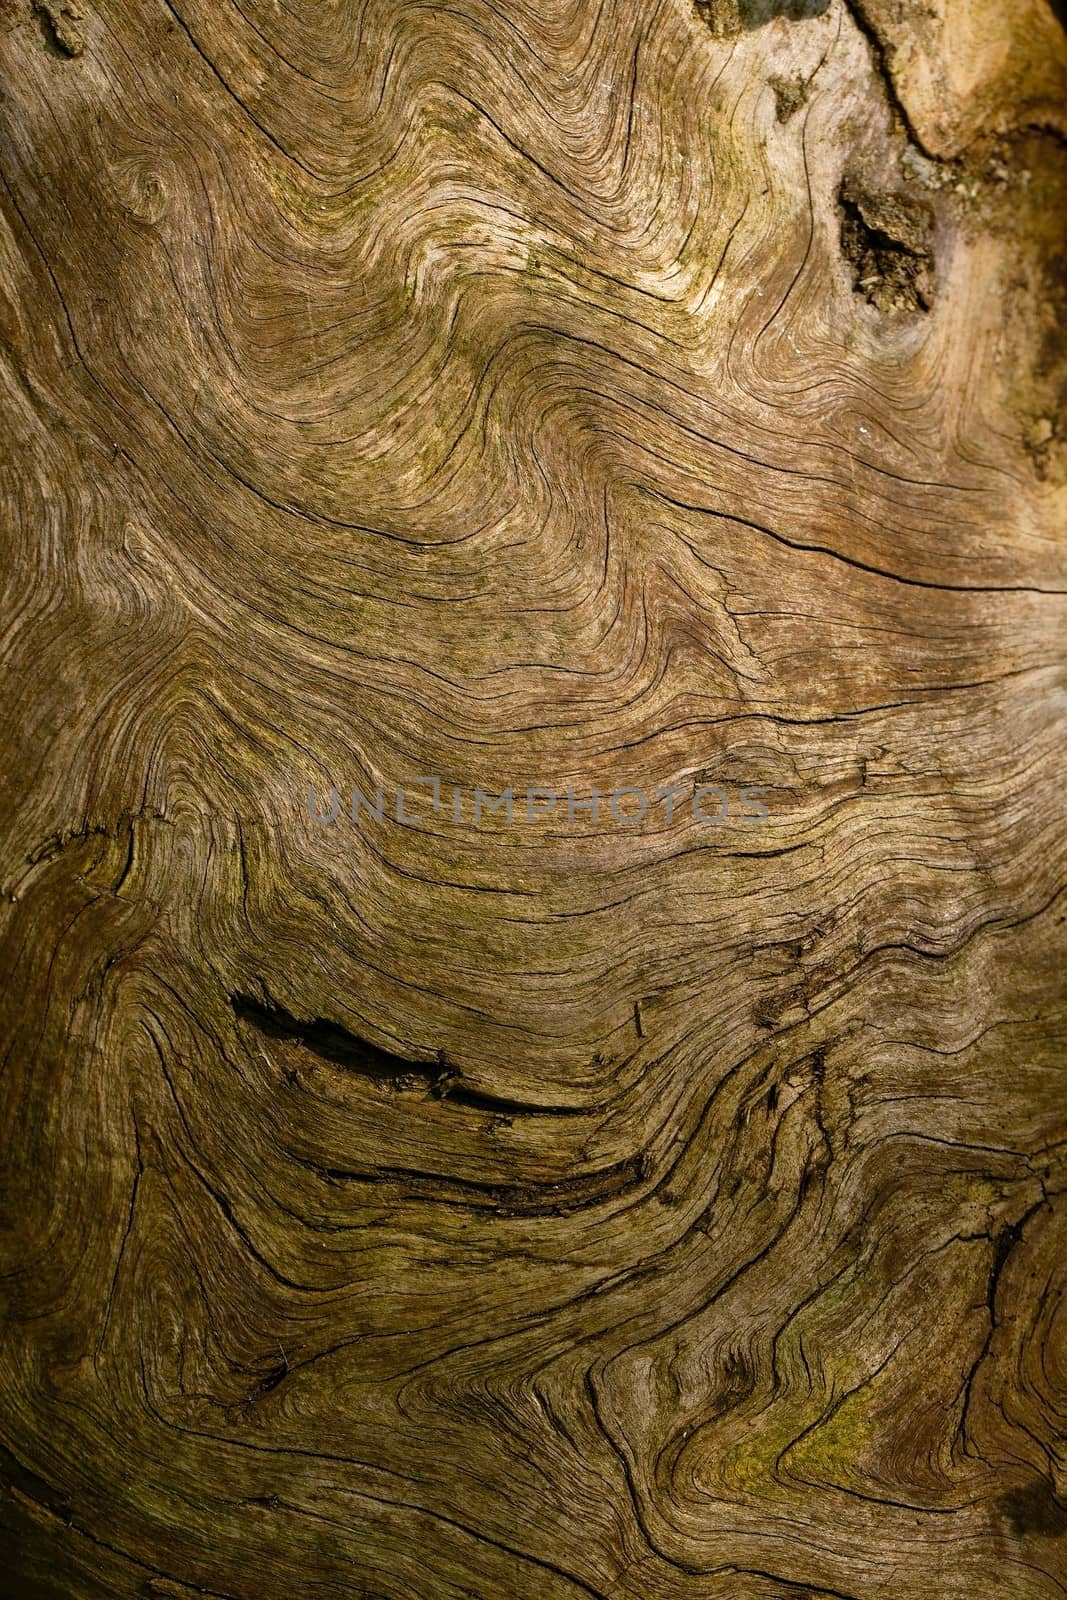 Wooden texture of a very old tree root